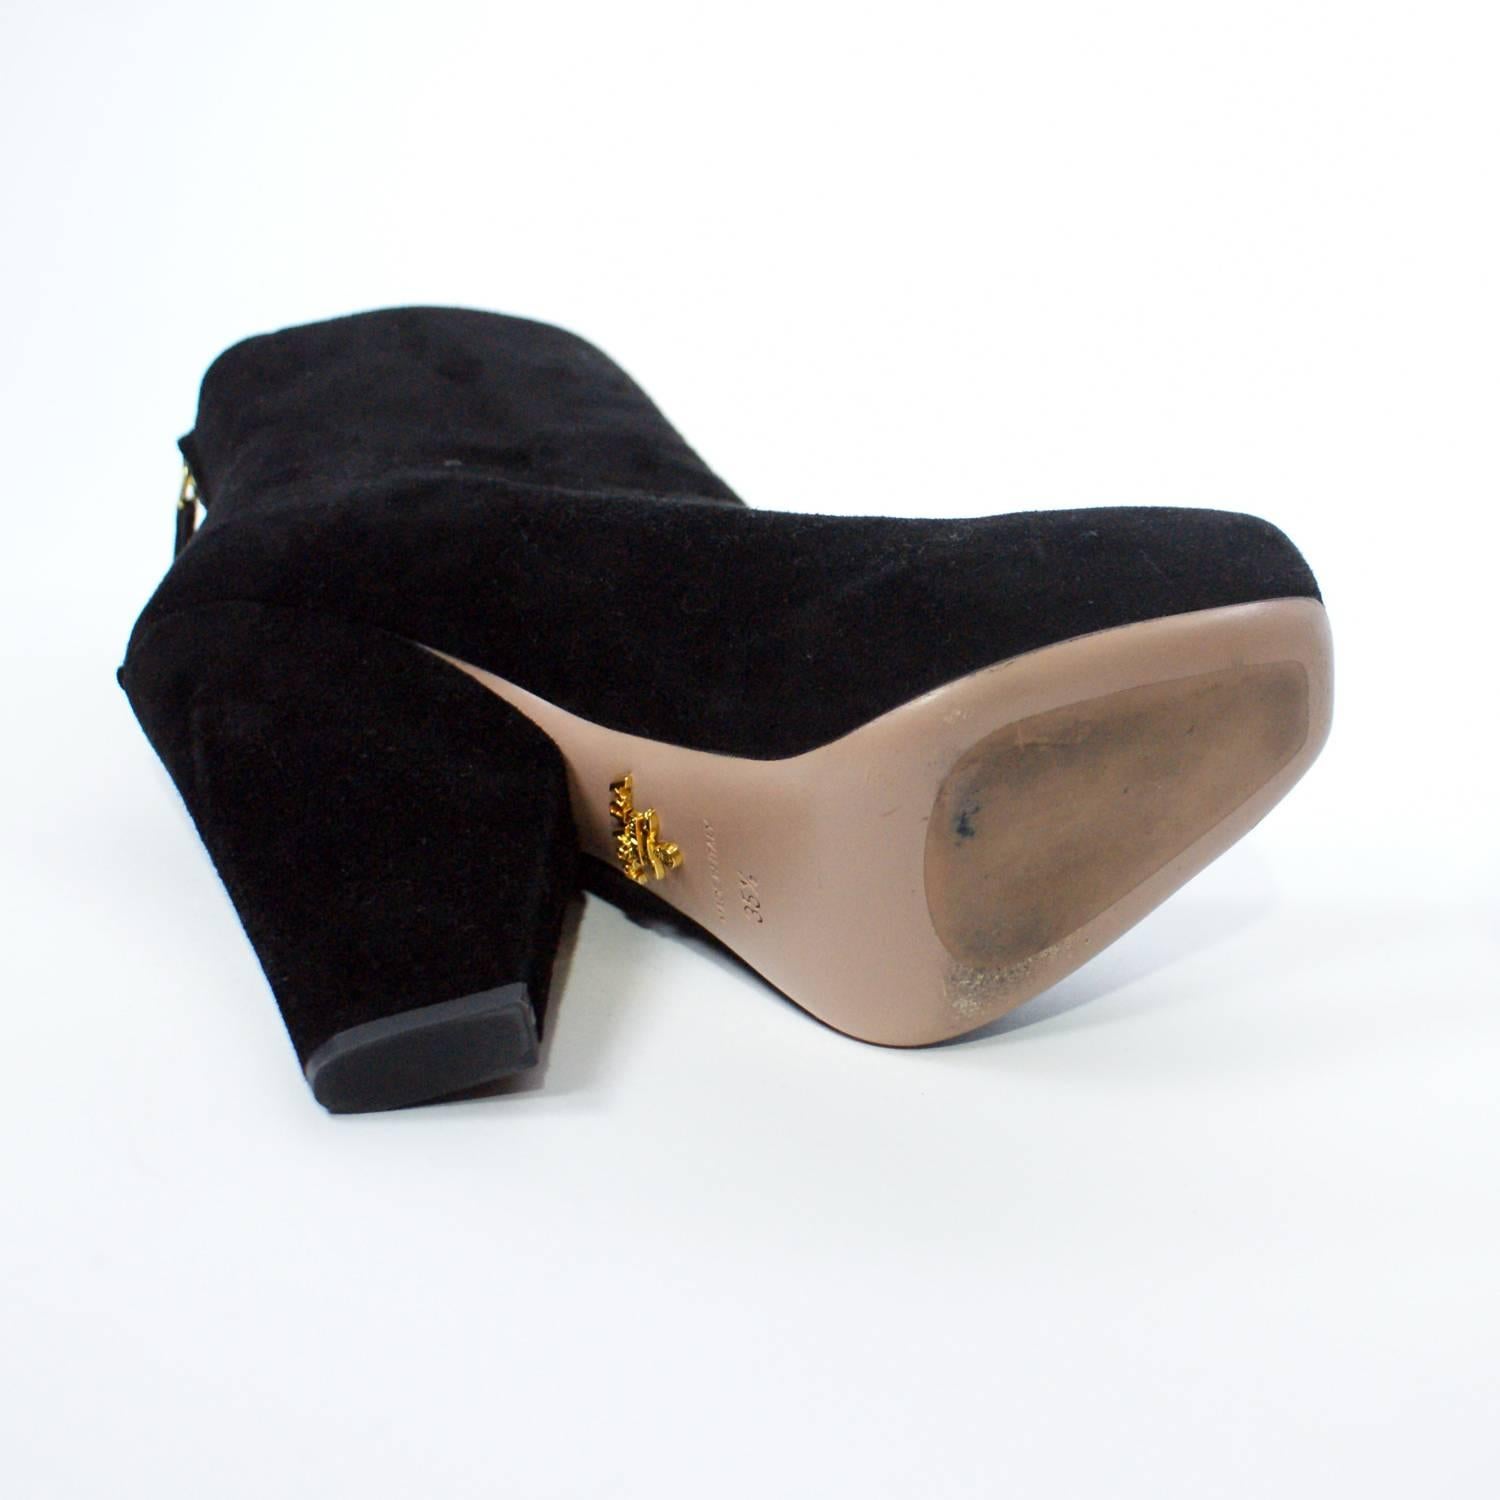 Prada Black Suede Thick Heel Ankle Boots For Sale 1